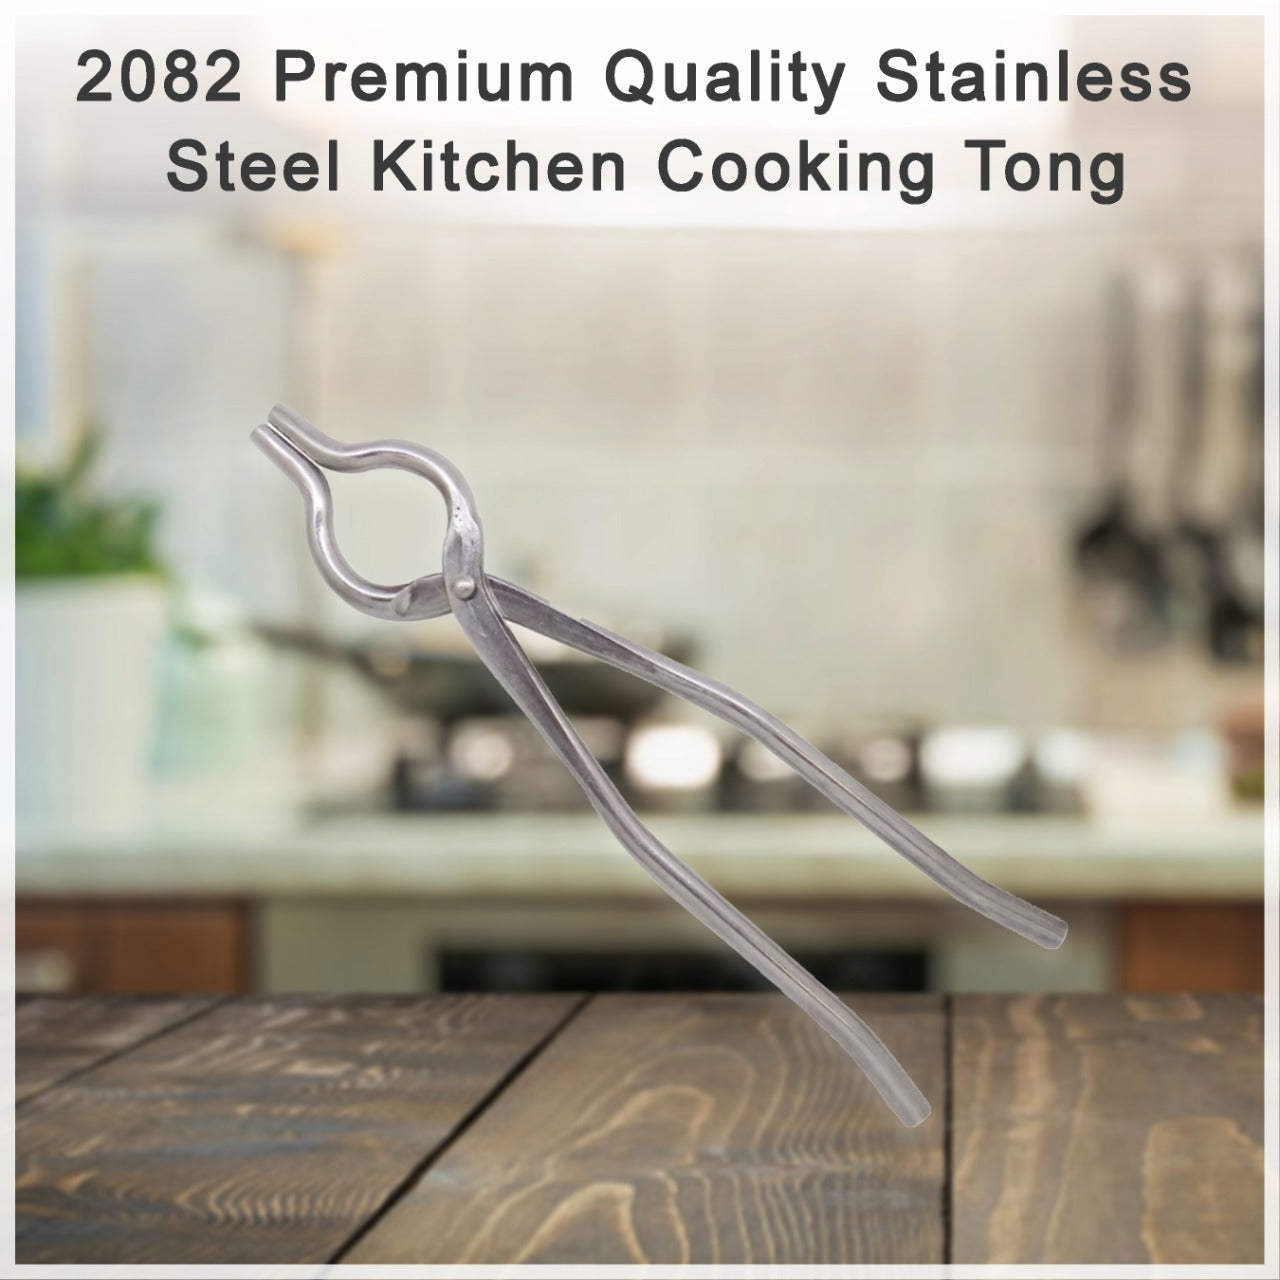 2082 Premium Quality Stainless Steel Kitchen Cooking Tong 